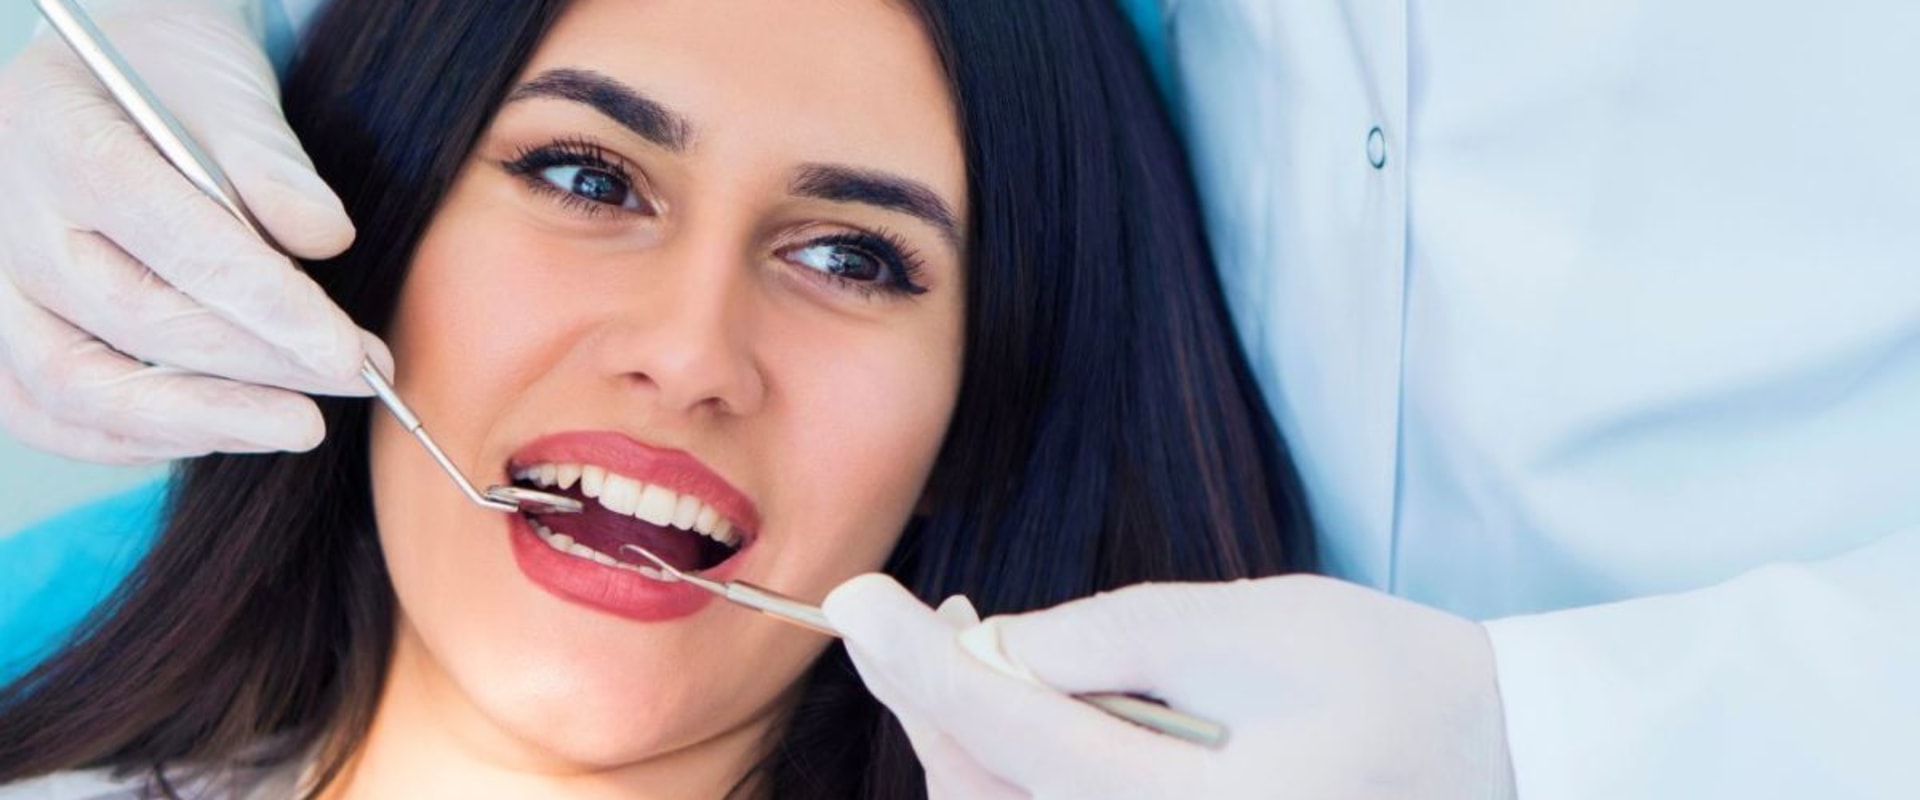 Researching Credentials and Experience: How to Find the Right Endodontist